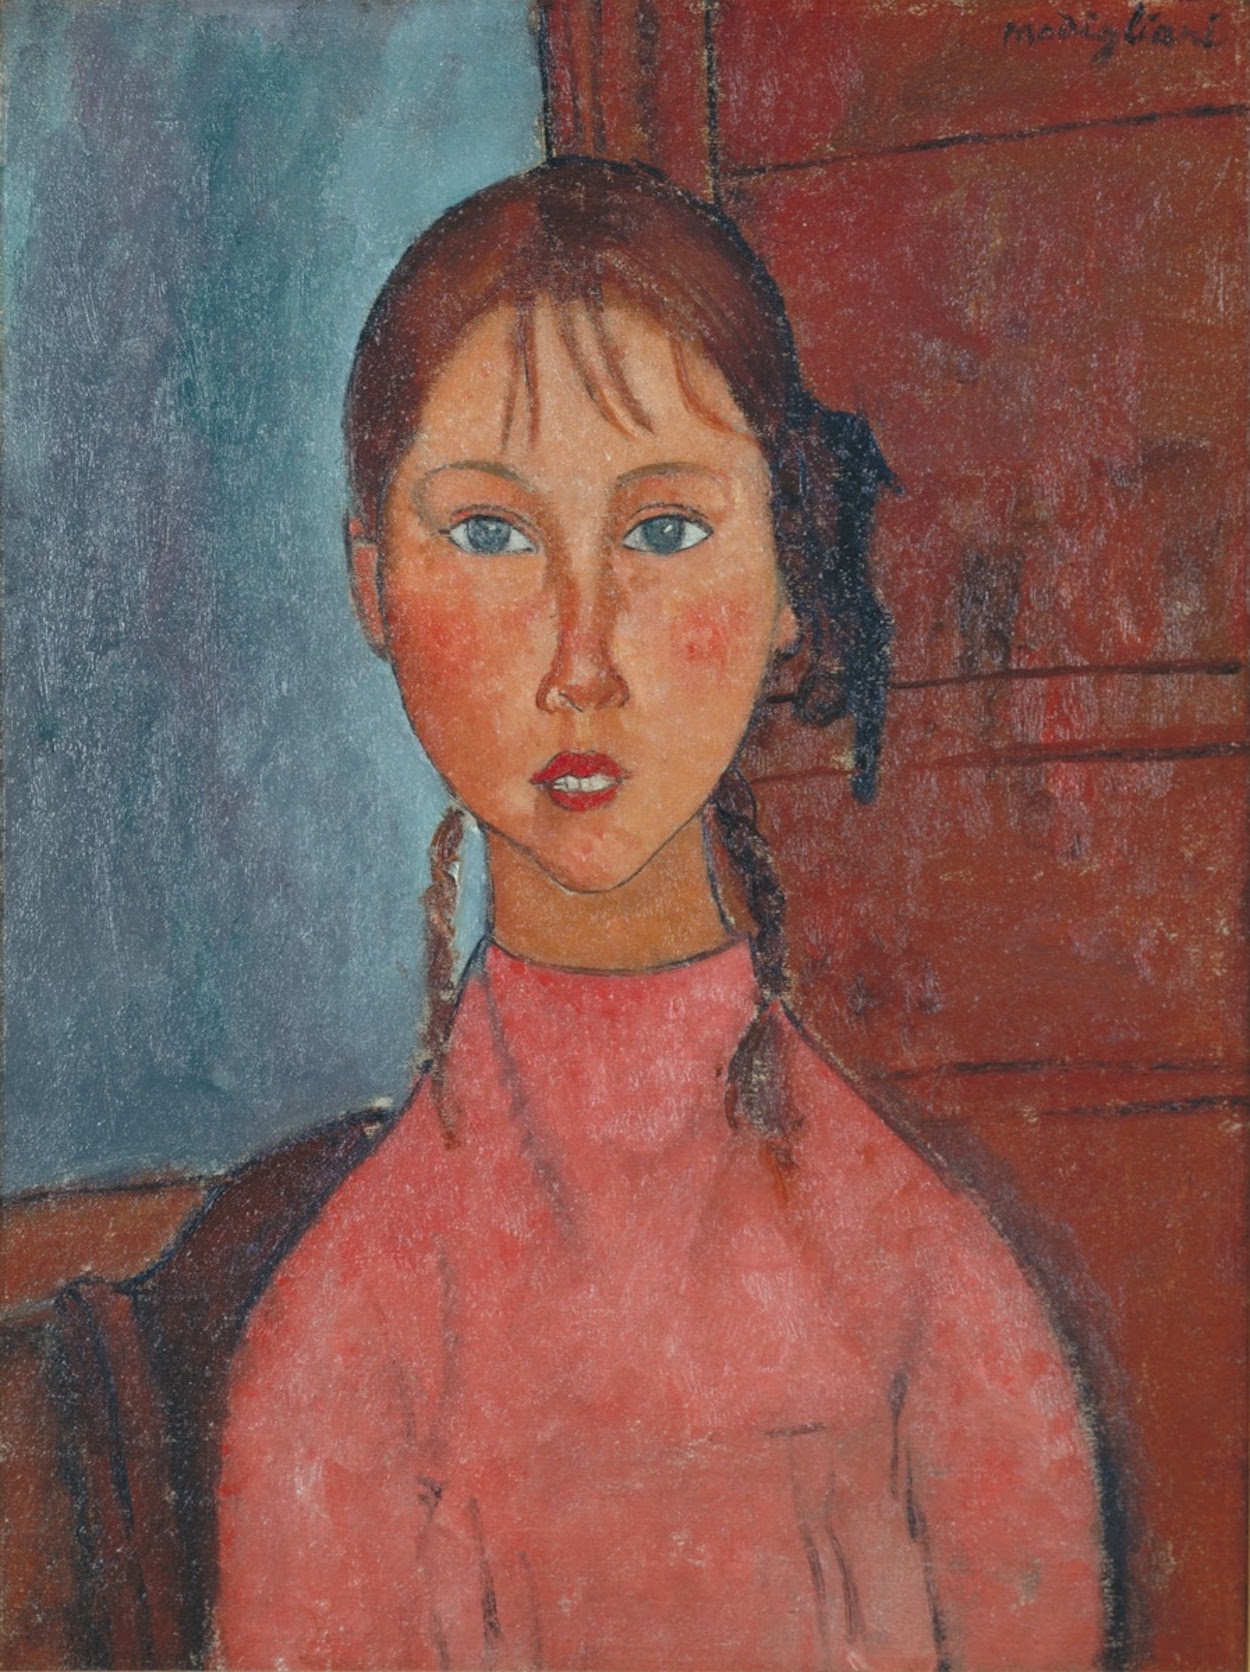 Girl with Pigtails by Amedeo Modigliani - c. 1918 - 60 × 45.5 cm Nagoya City Art Museum